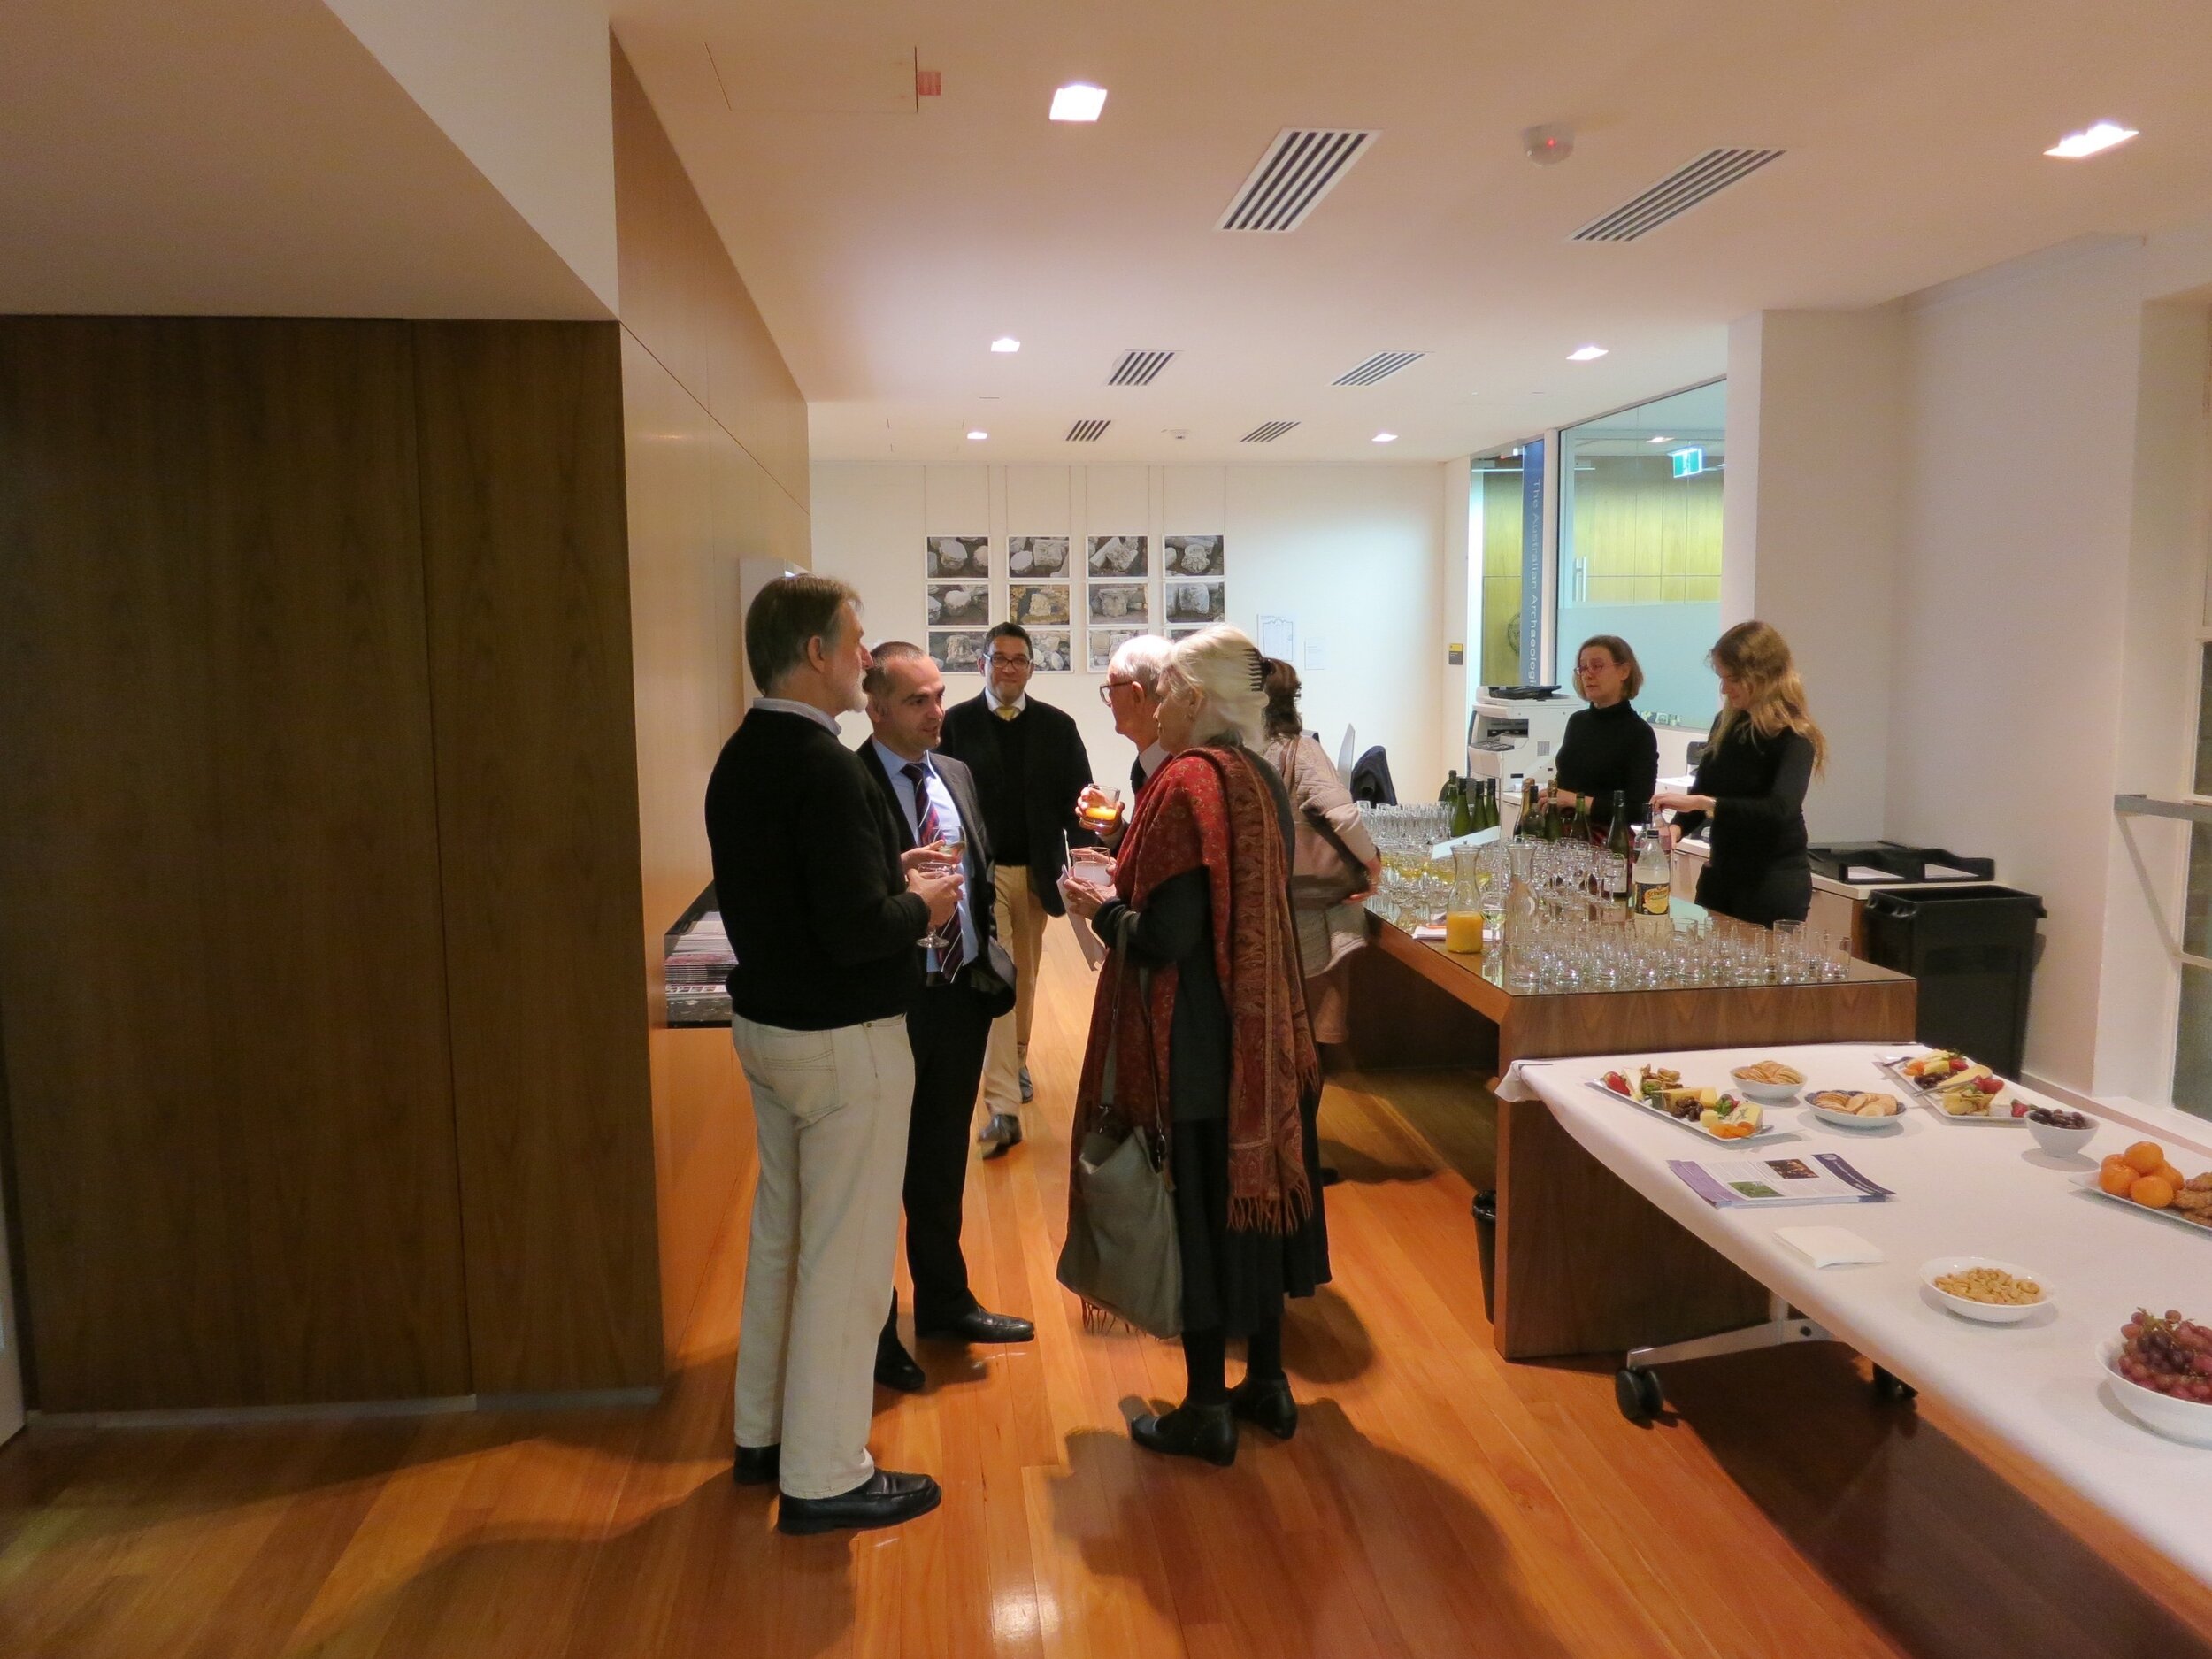  View of the opening of  Response to Cyprus,  10 July 2013, hosted by the Australian Archaeological Institute at Athens (AAIA) at the Centre of Classical and Near Eastern Studies of Australia (CCANESA). Work by  Derek Kreckler  is shown on the rear w